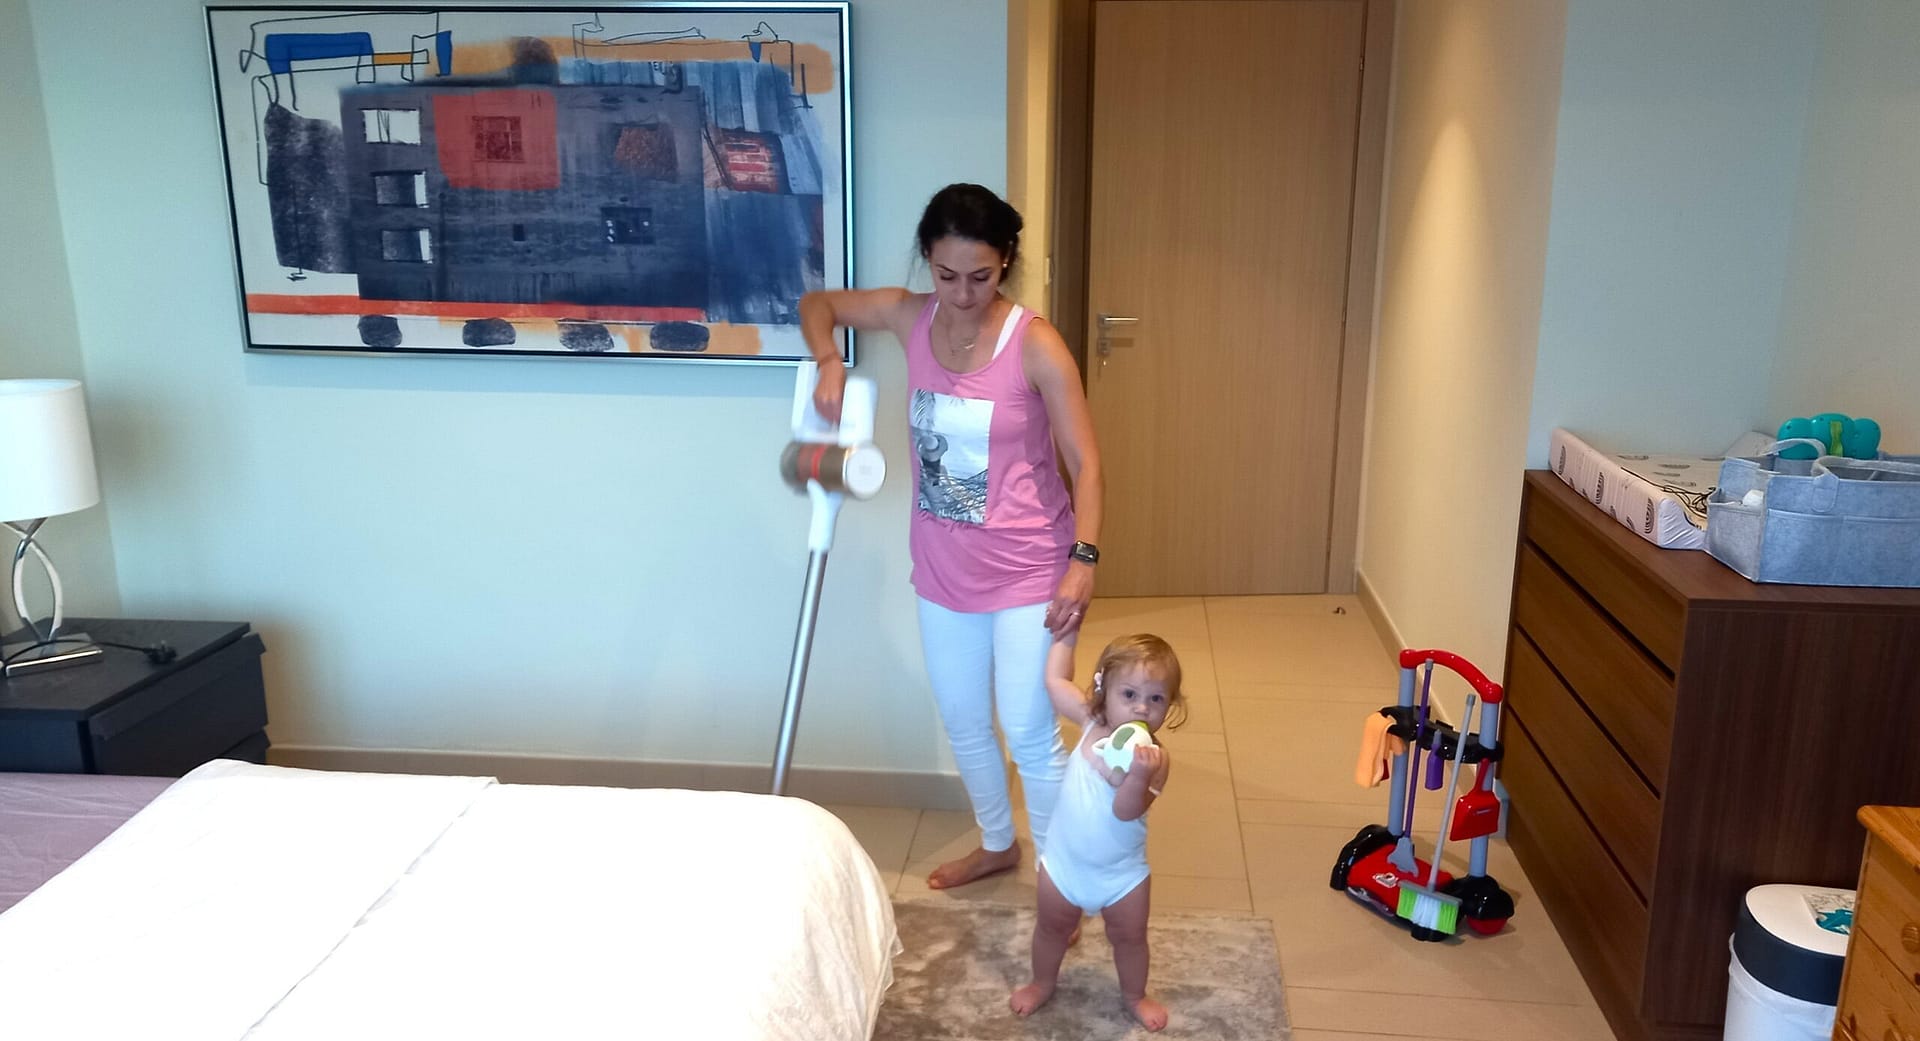 mother and daughter cleaning as time management multitasking technique for busy moms